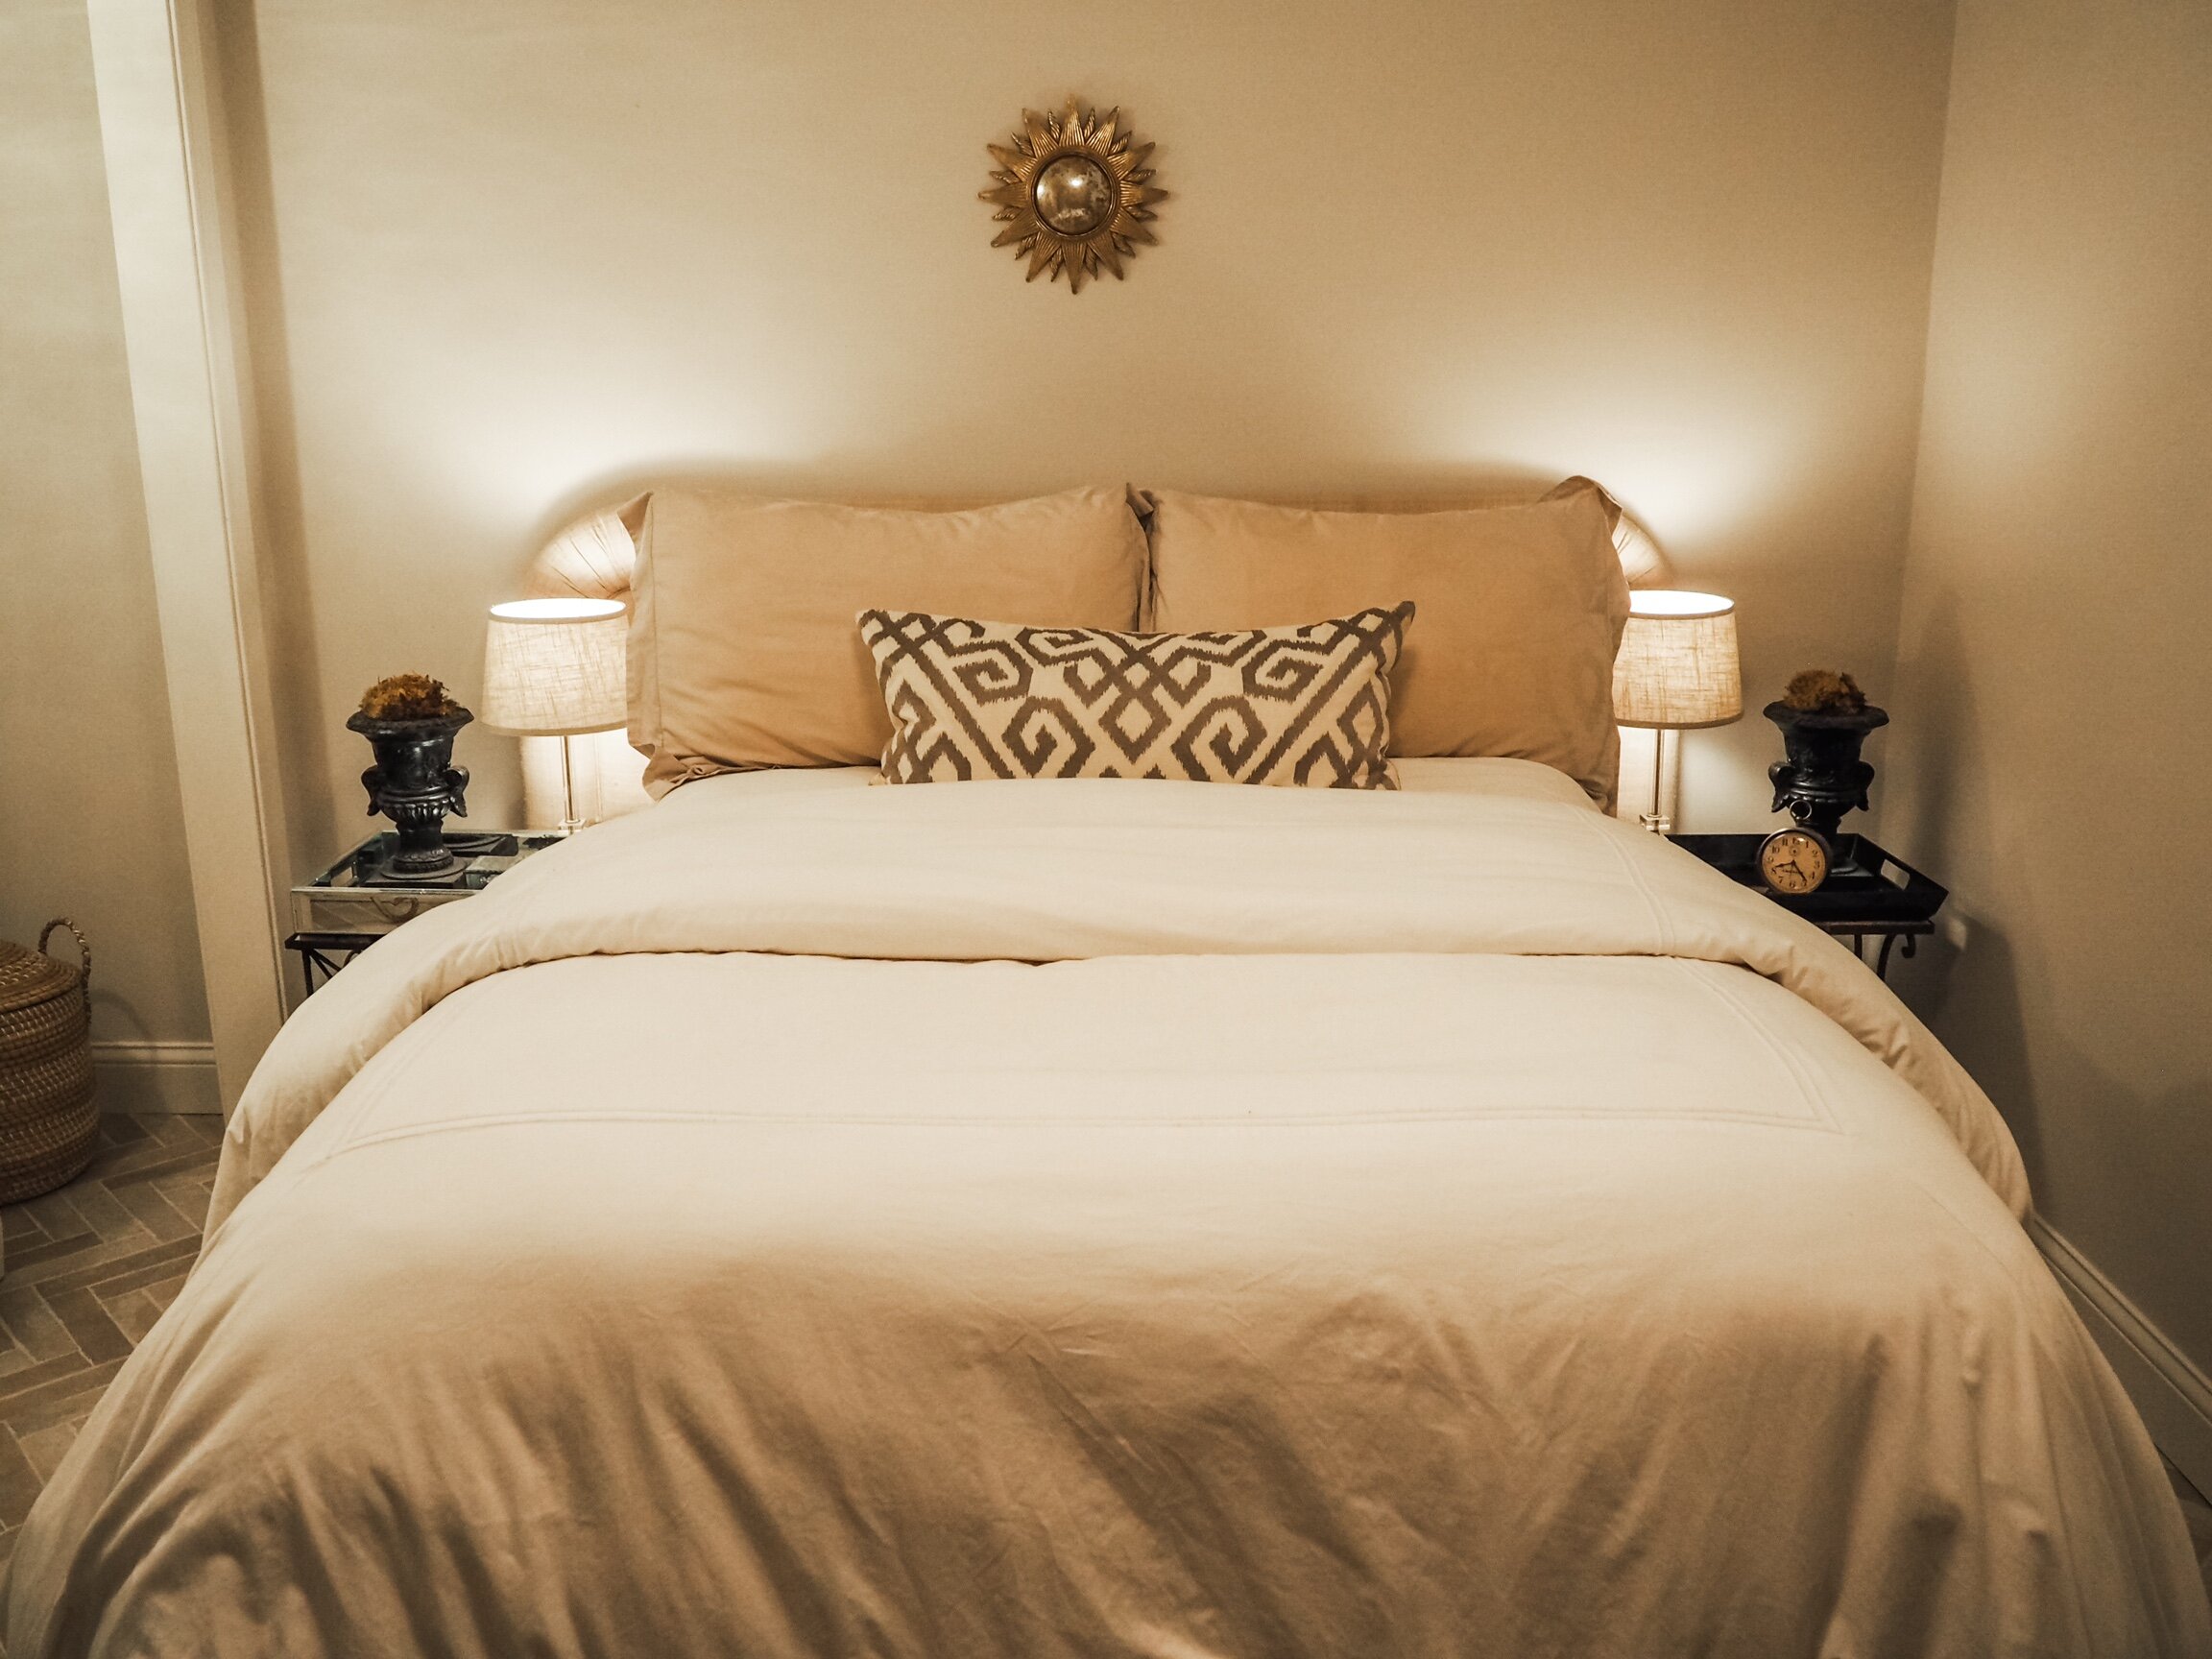 Full-sized bed and raw silk headboard, flanked by vintage crystal lamps on wrought iron nightstands